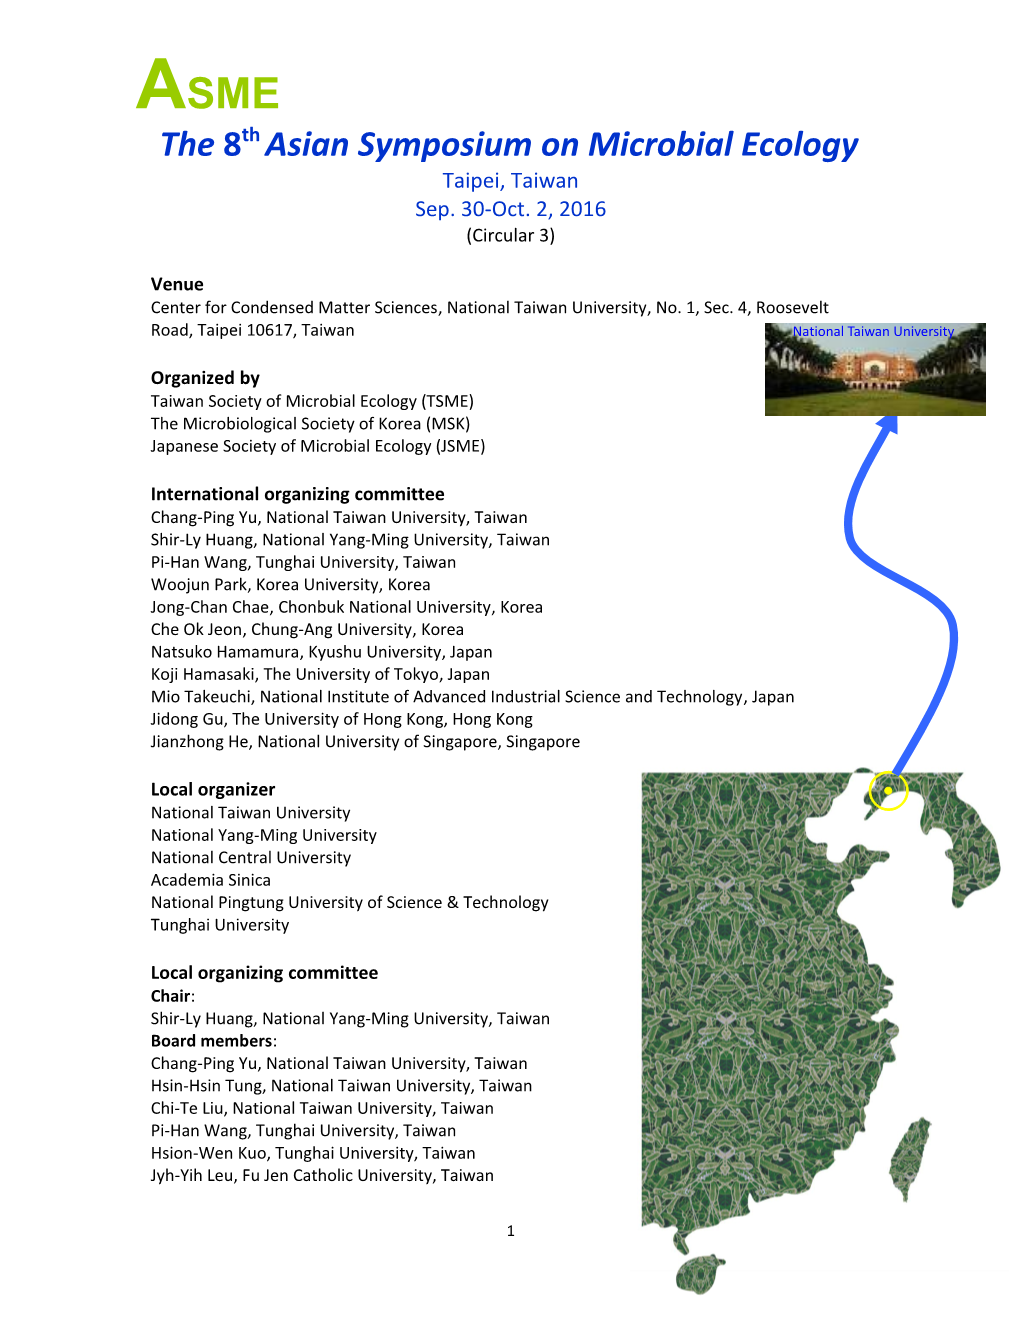 The 2016 Asian Symposium on Microbial Ecology